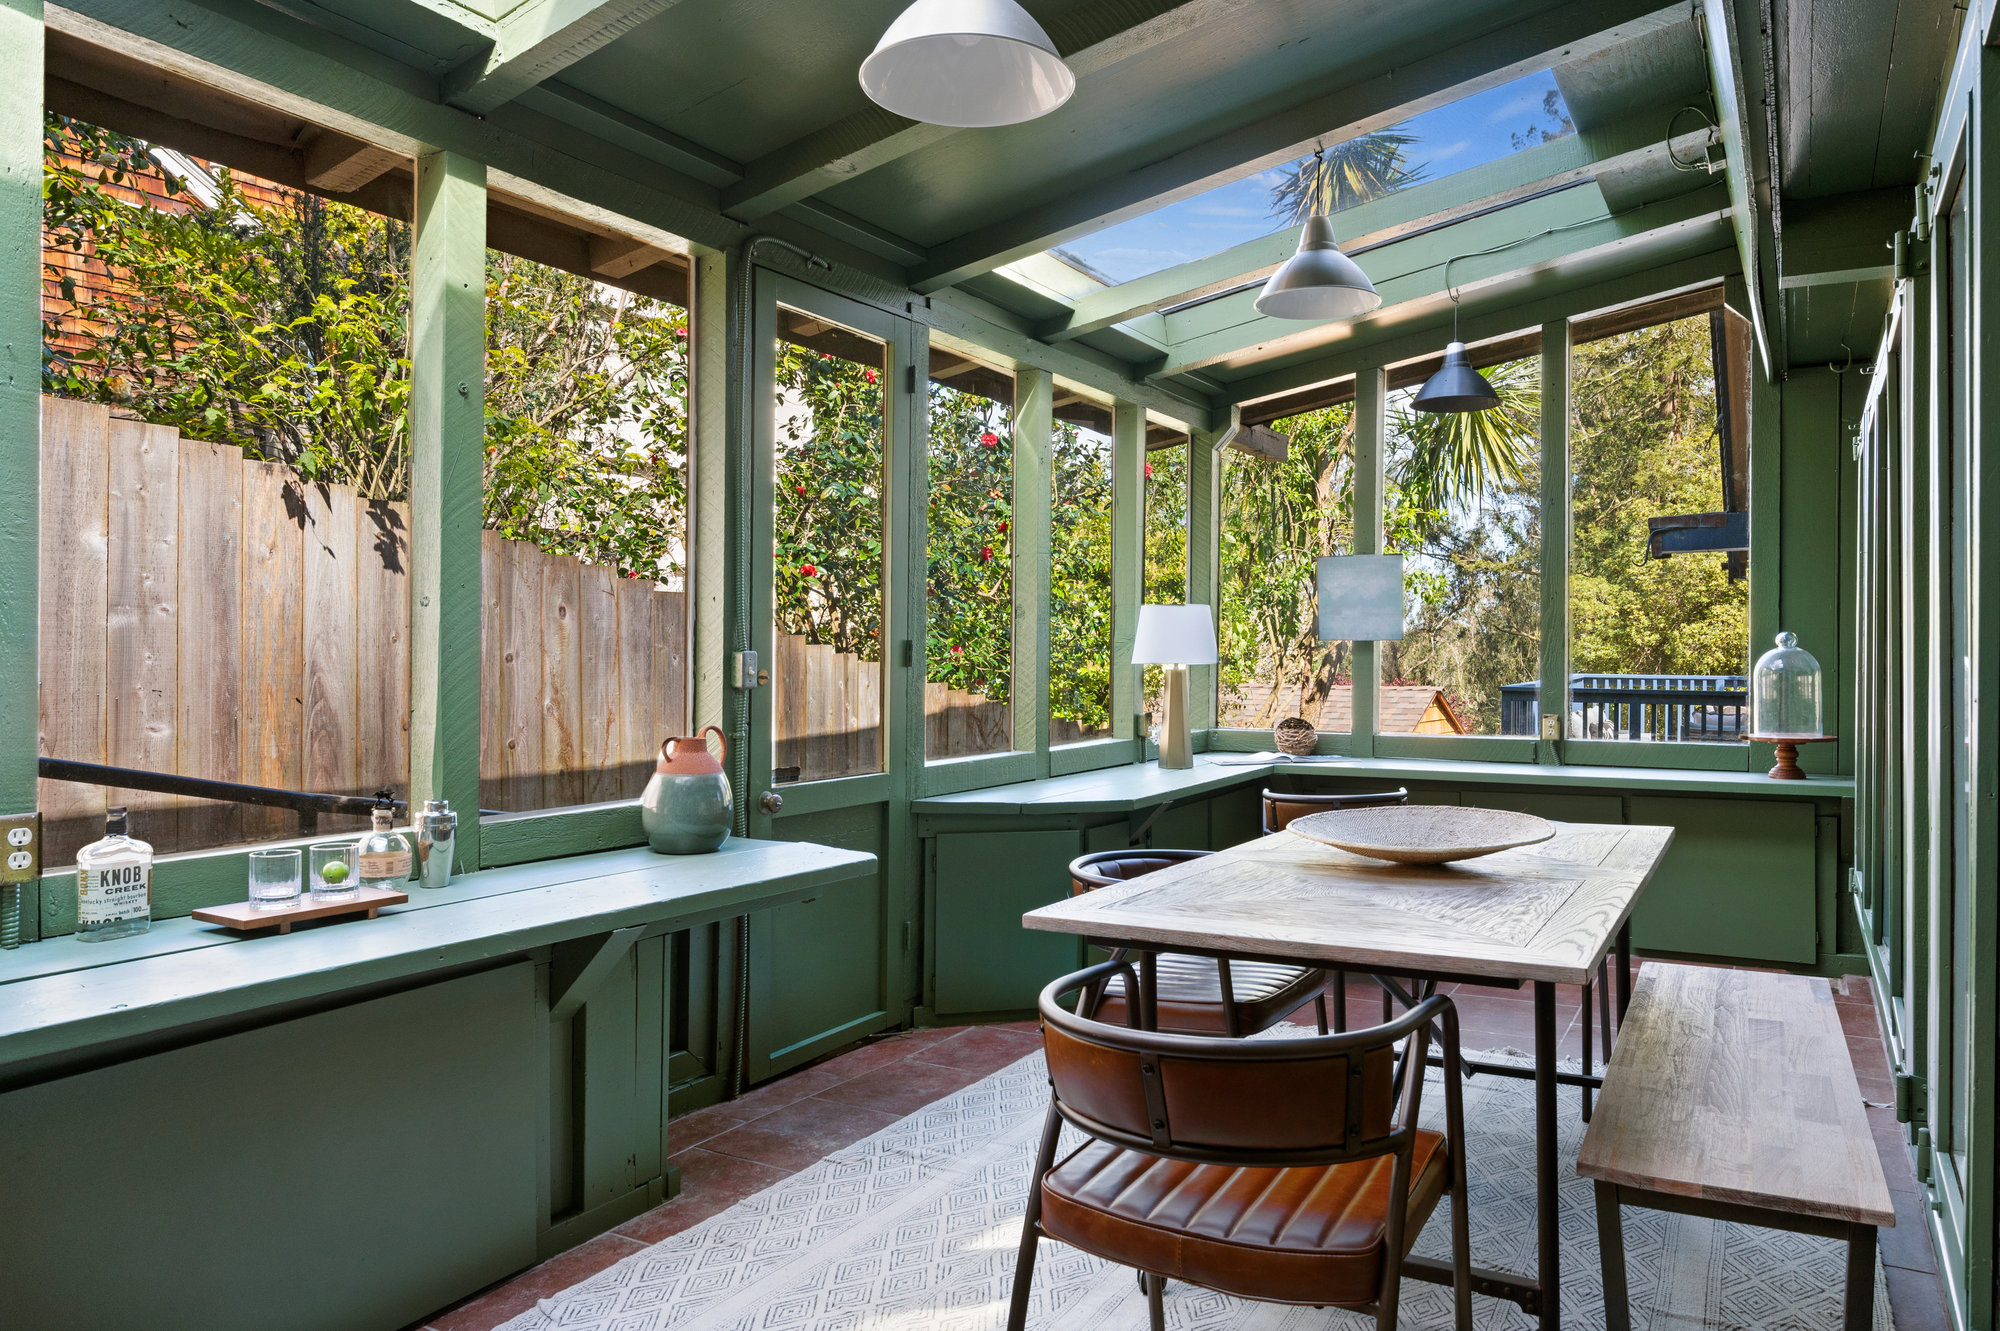 View of the sunroom at 281 Edgewood Ave in Cole Valley, represented by John DiDomenico